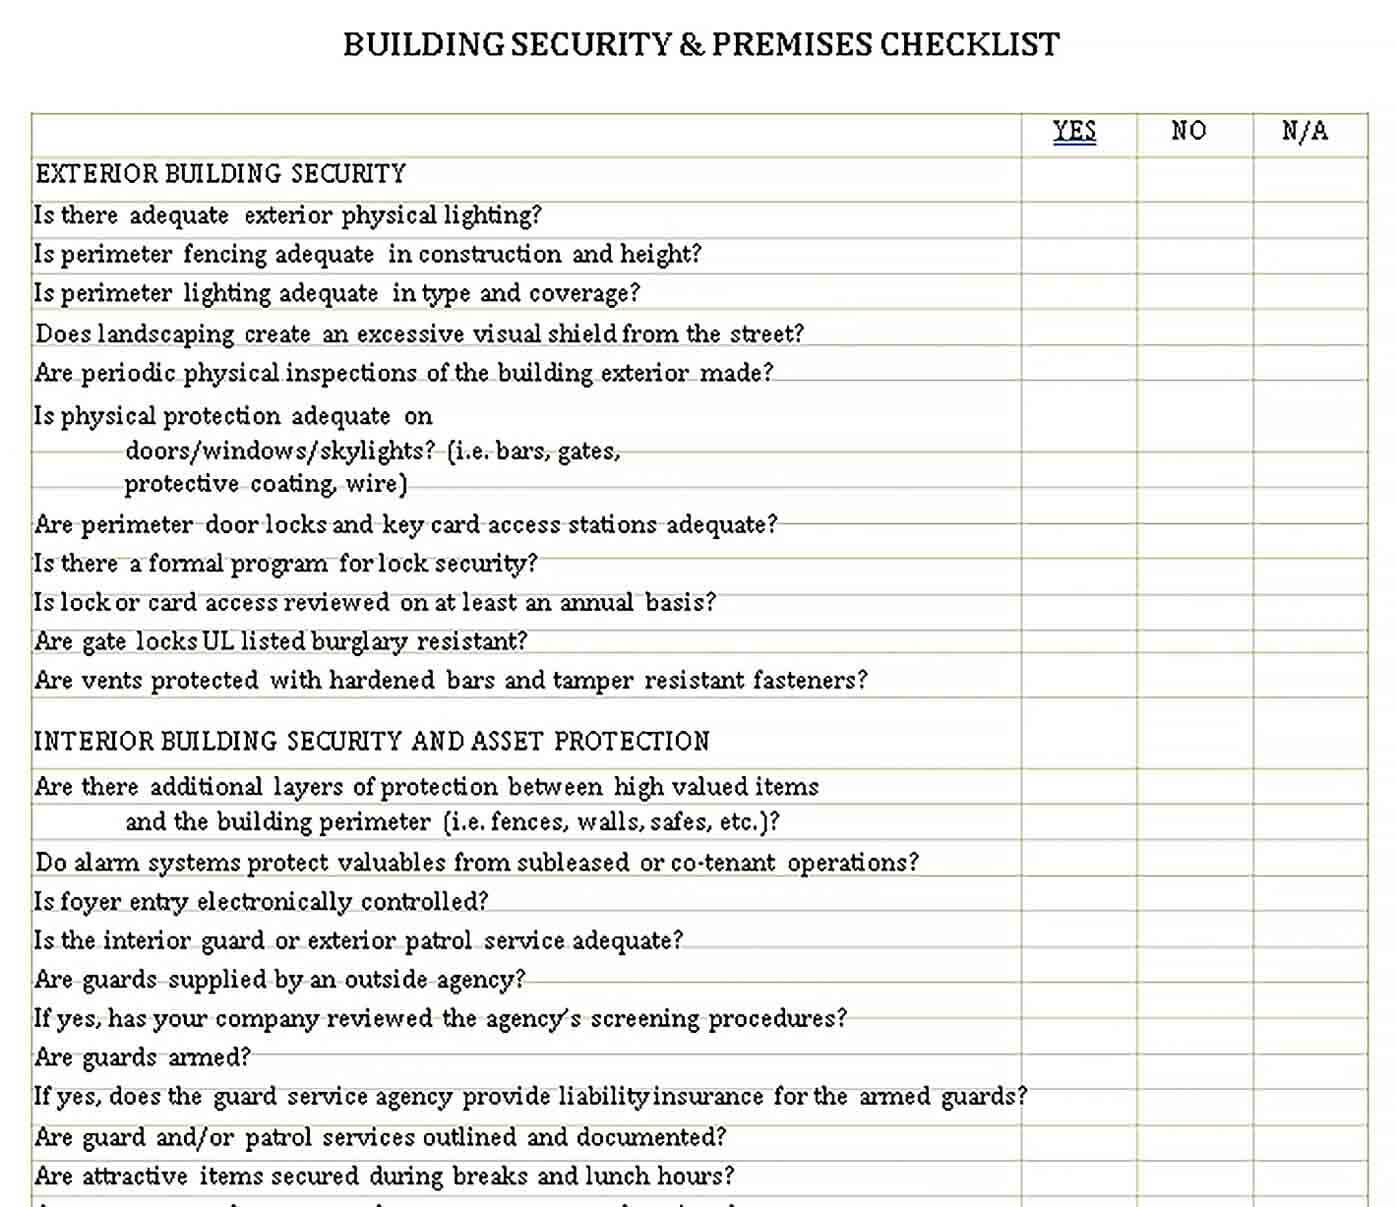 Sample Building Security and Premises Checklist Template